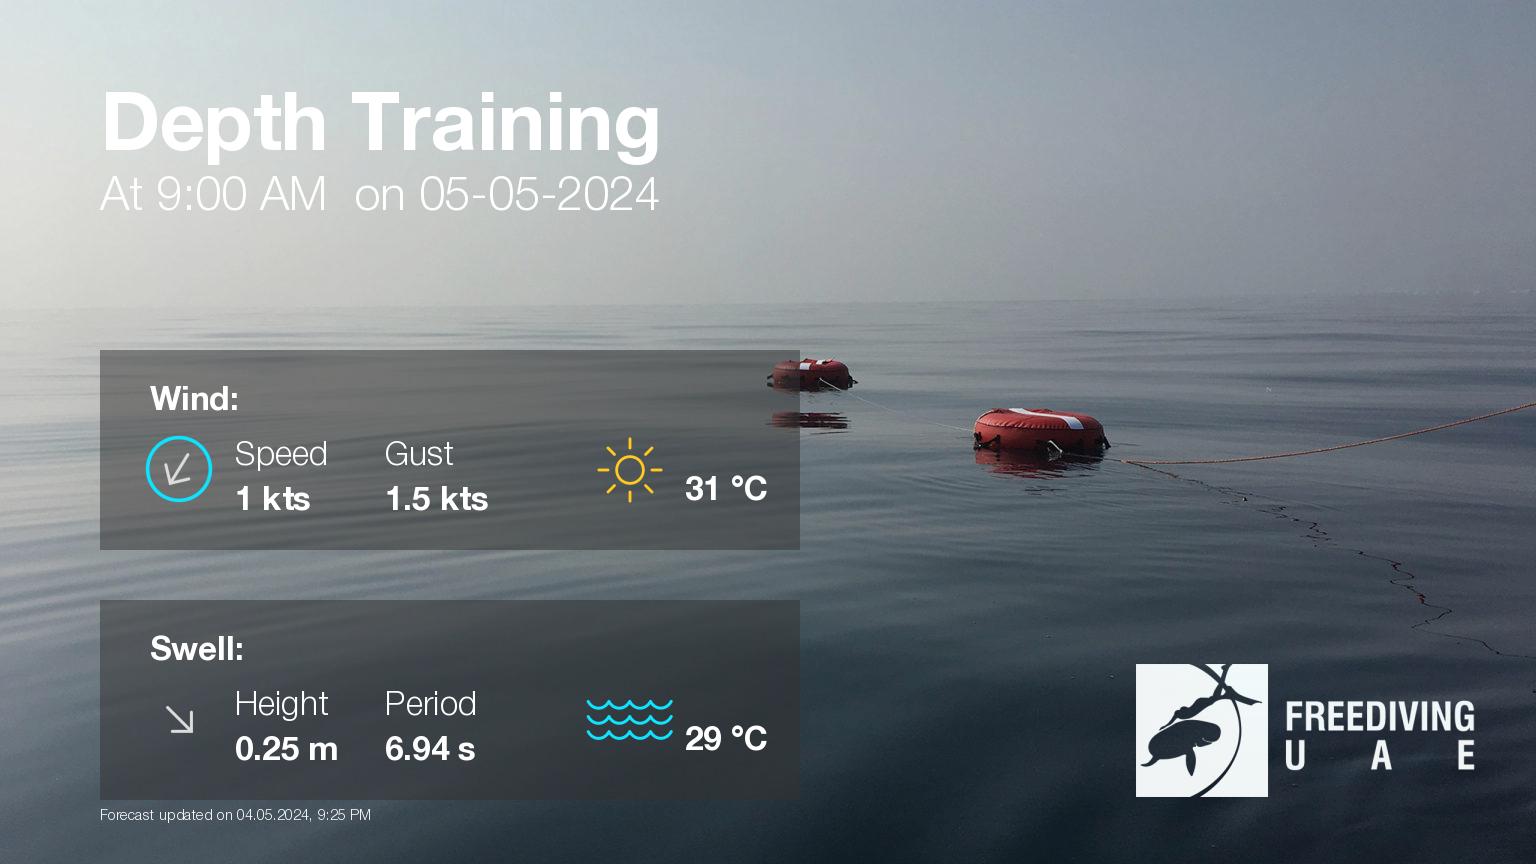 Expected weather during Depth Training on Sun, May 5, at 9:00 AM